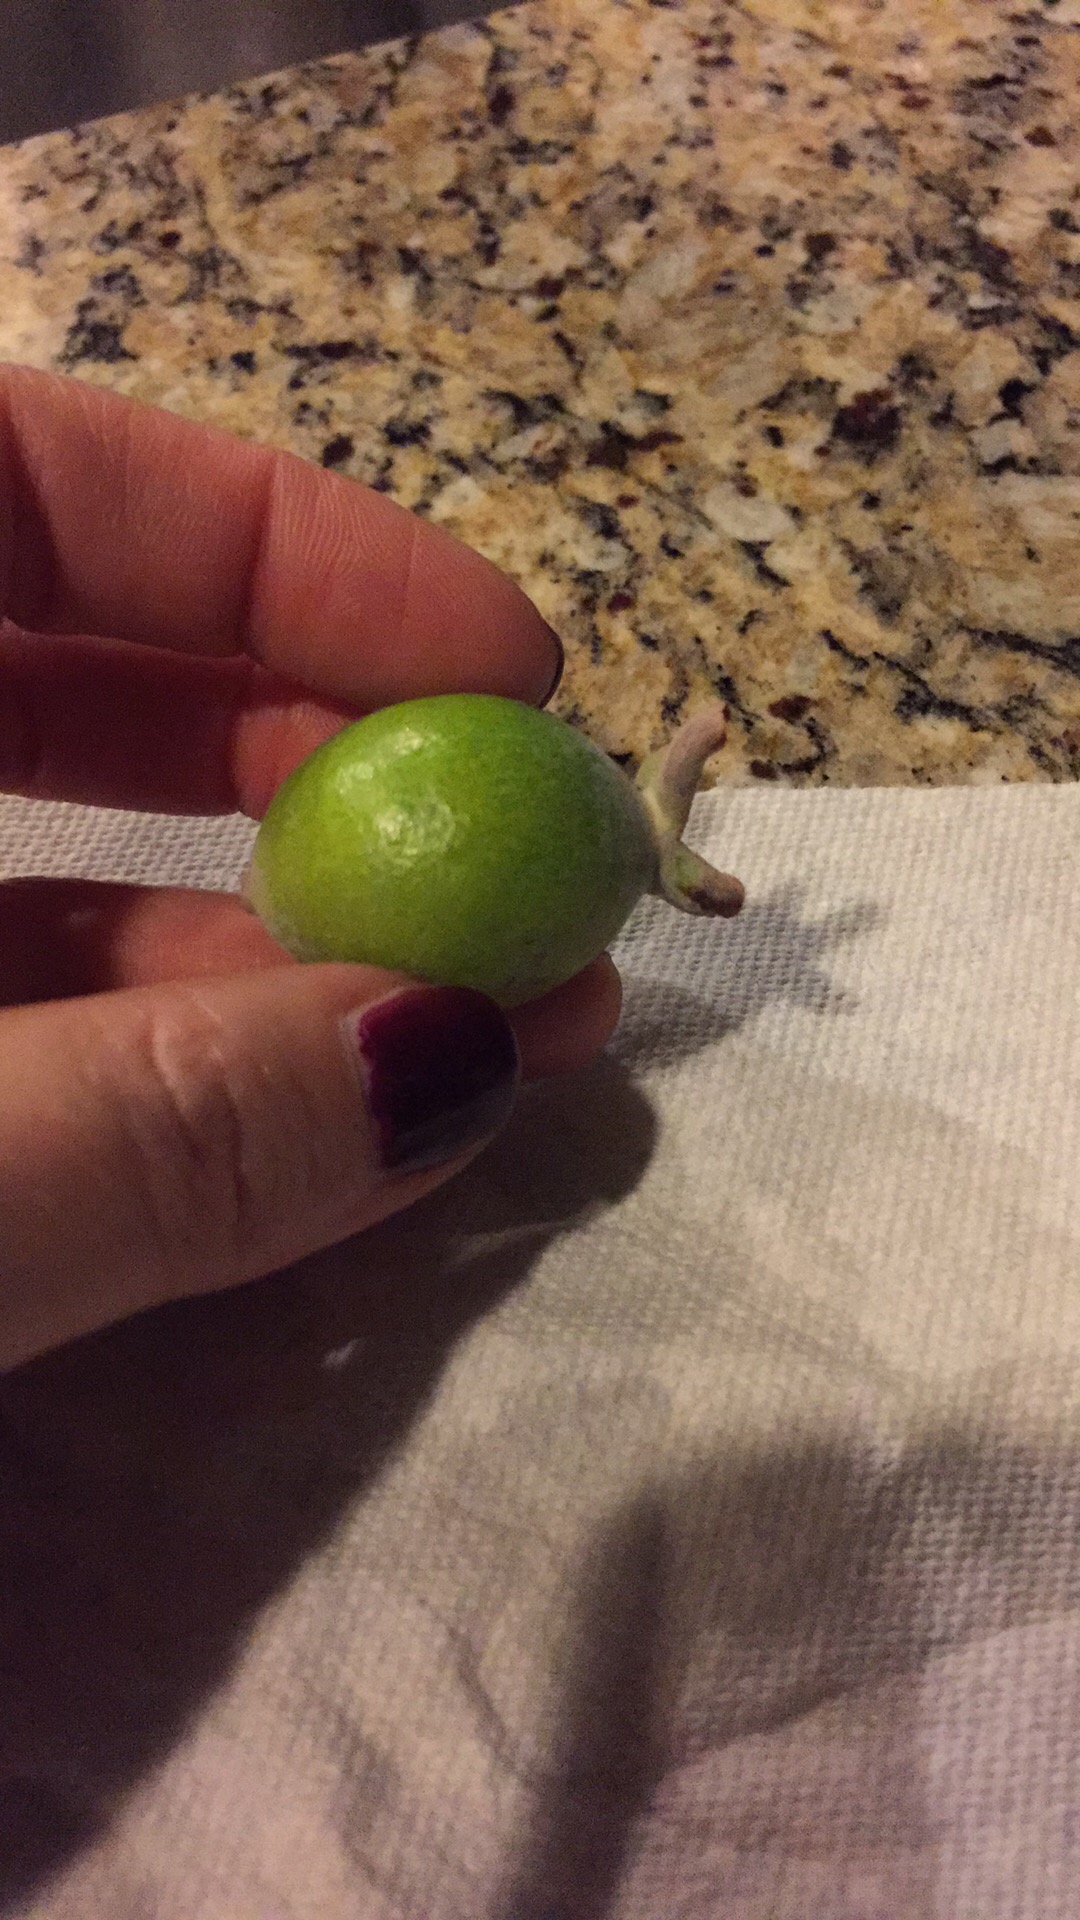 identification - What is this oval, small green fruit? - Gardening ...